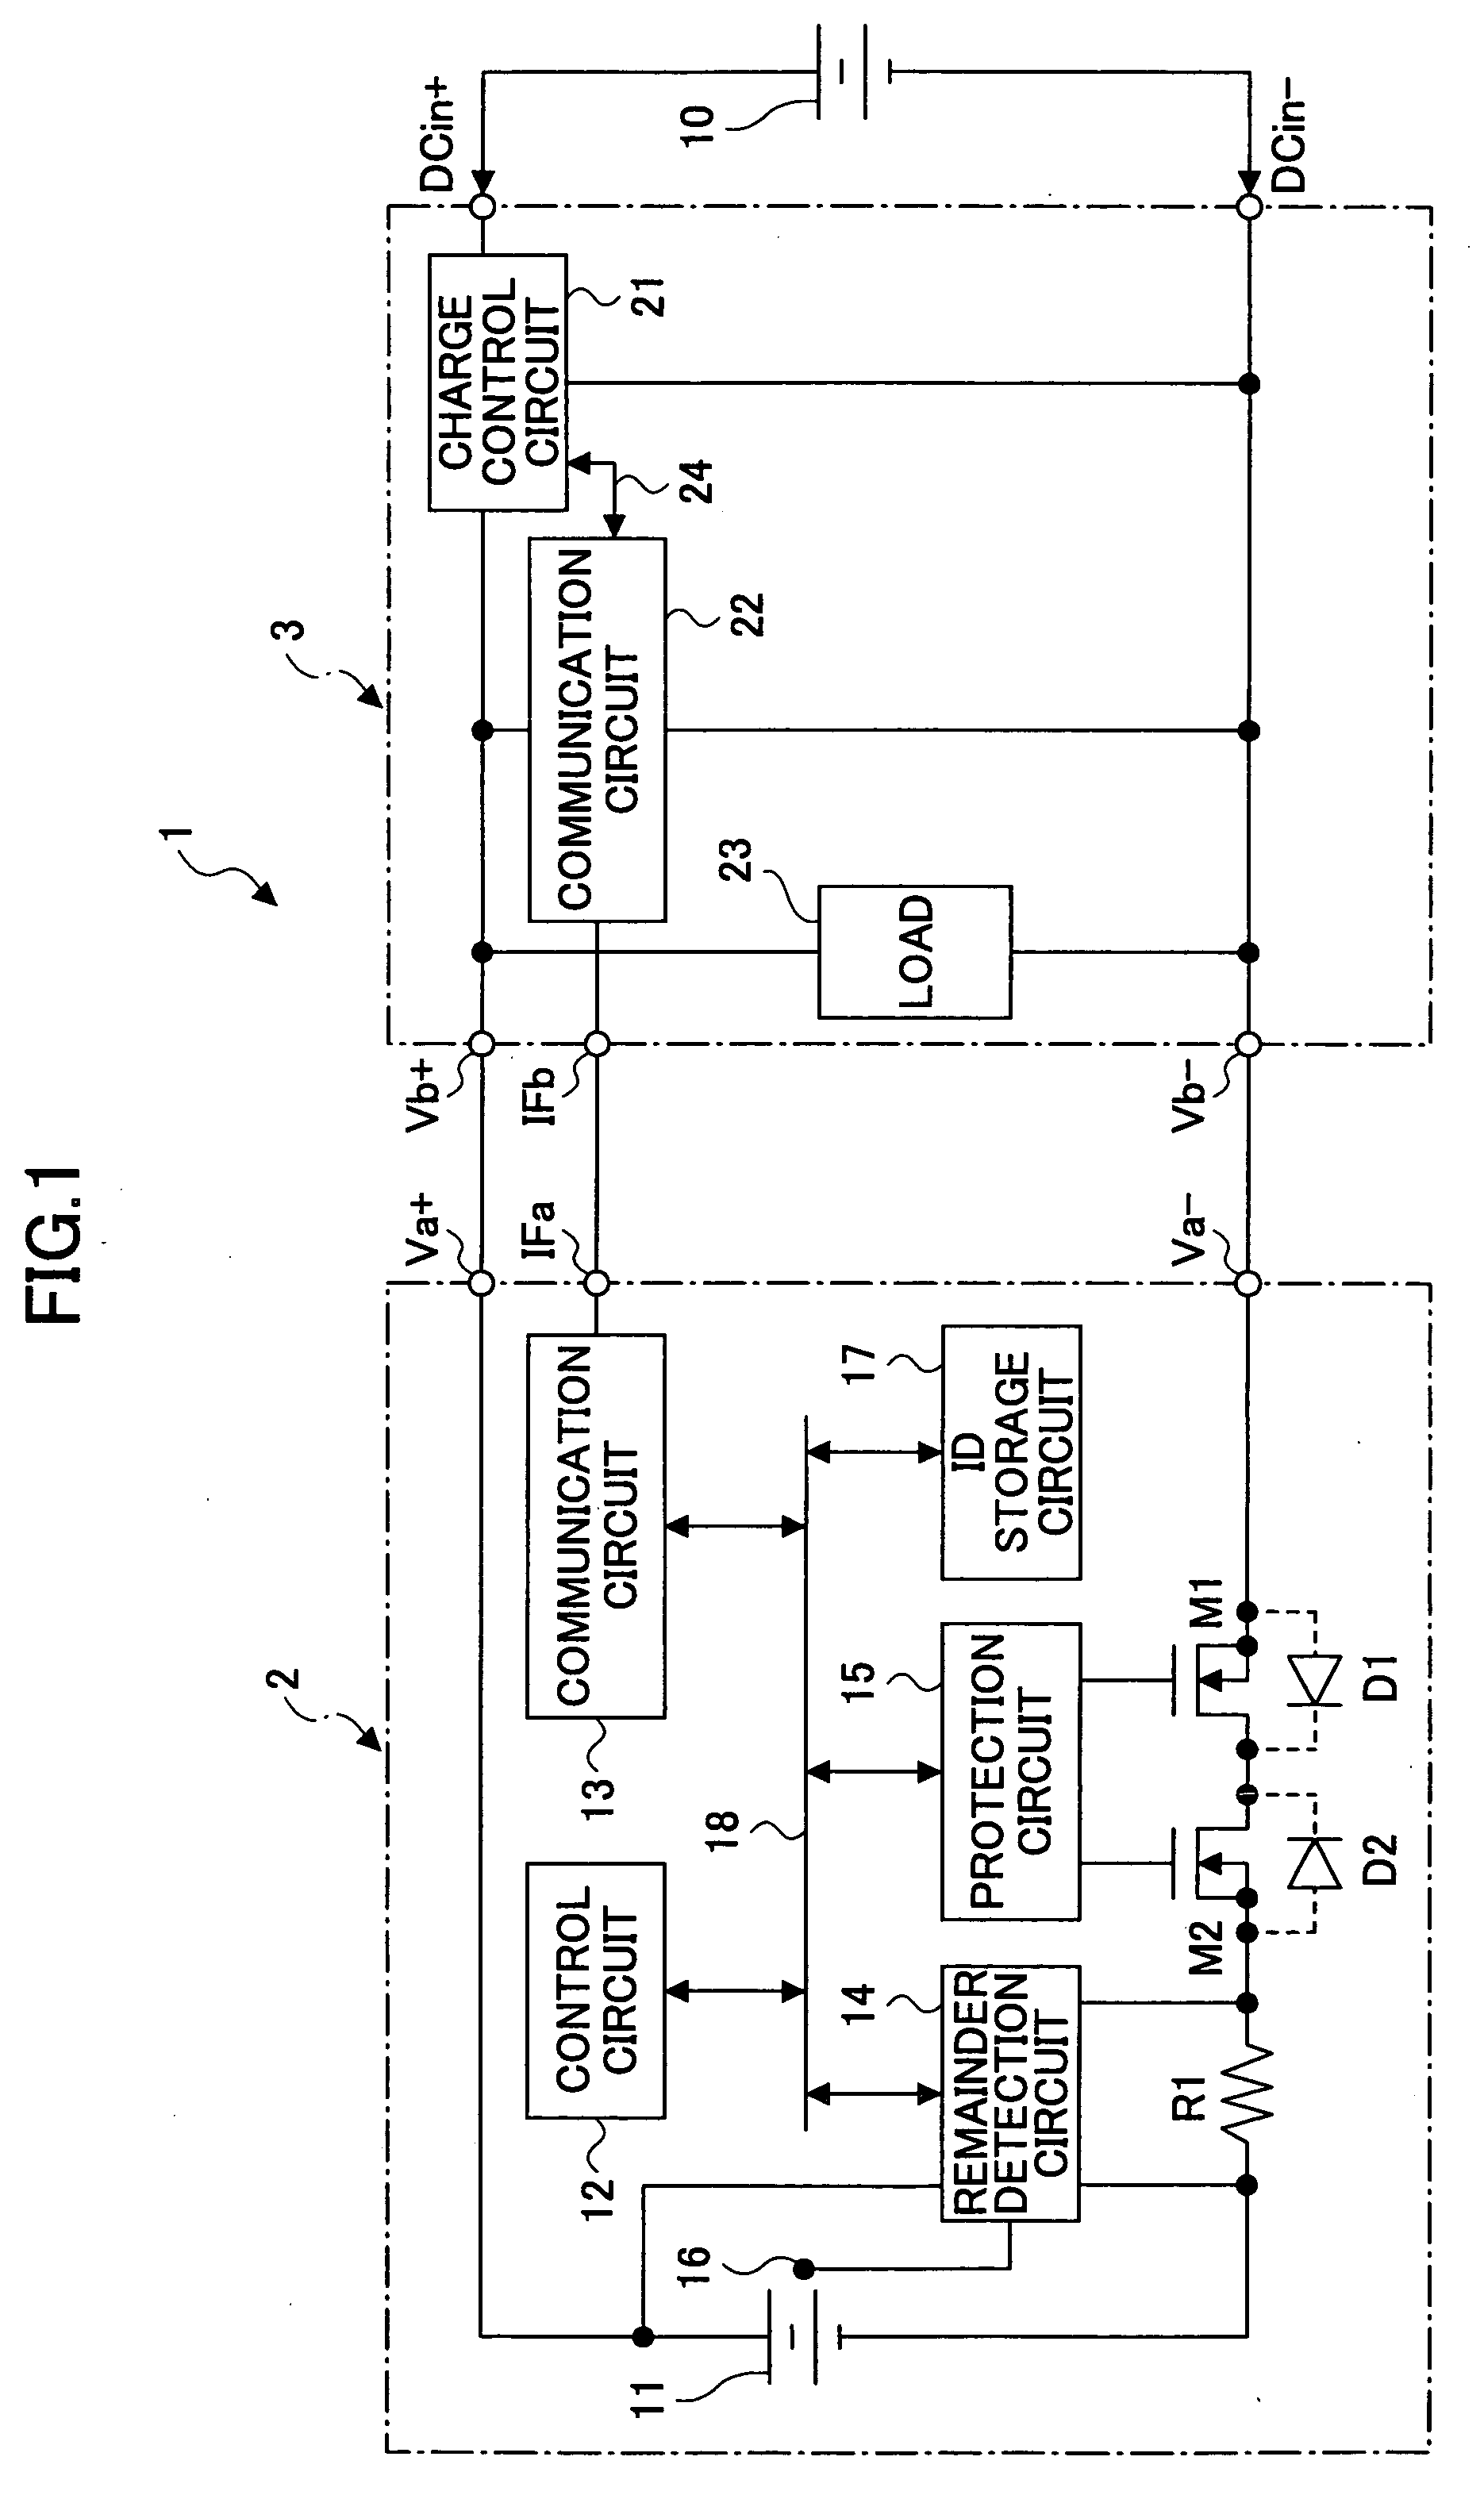 Battery pack having a secondary battery and a charging system using the battery pack